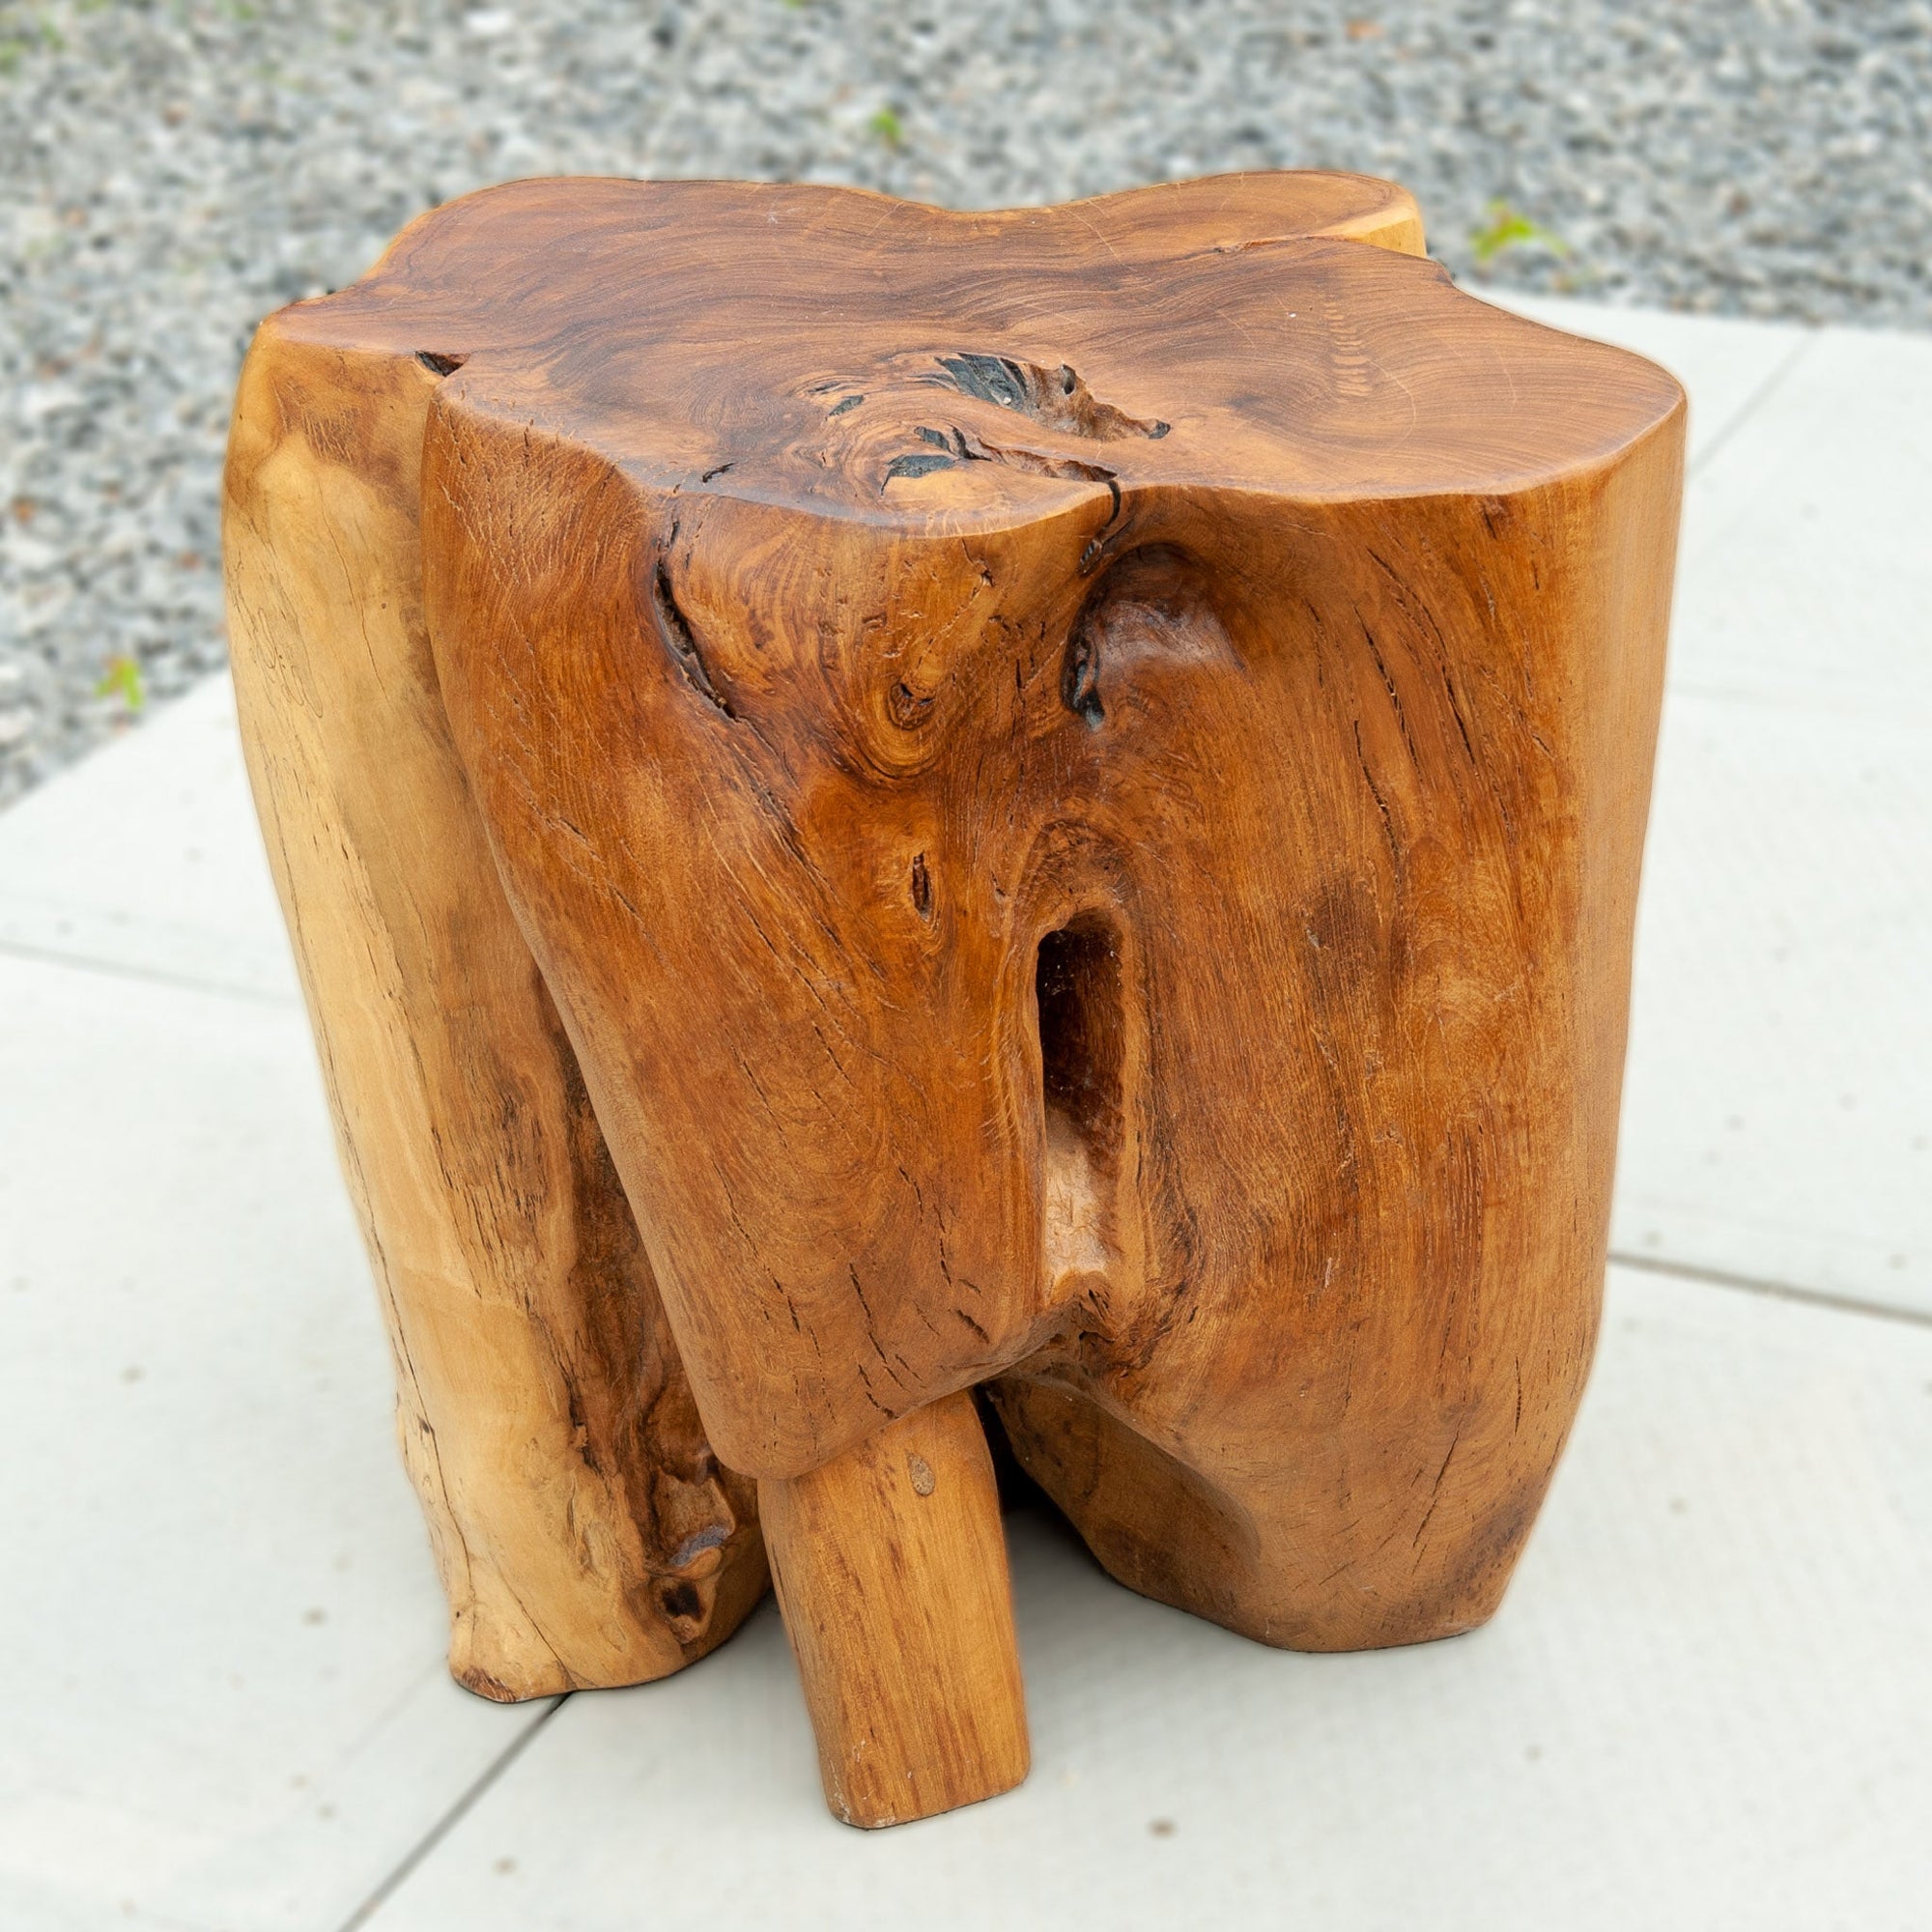 An image of a Teak Trunk Stool. This unique stool is crafted from a teak trunk, preserving the natural beauty and character of the wood. The stool showcases the rich textures, grains, and unique patterns found in teak. With its solid and sturdy construction, it serves as both a functional seating option and a piece of natural art.